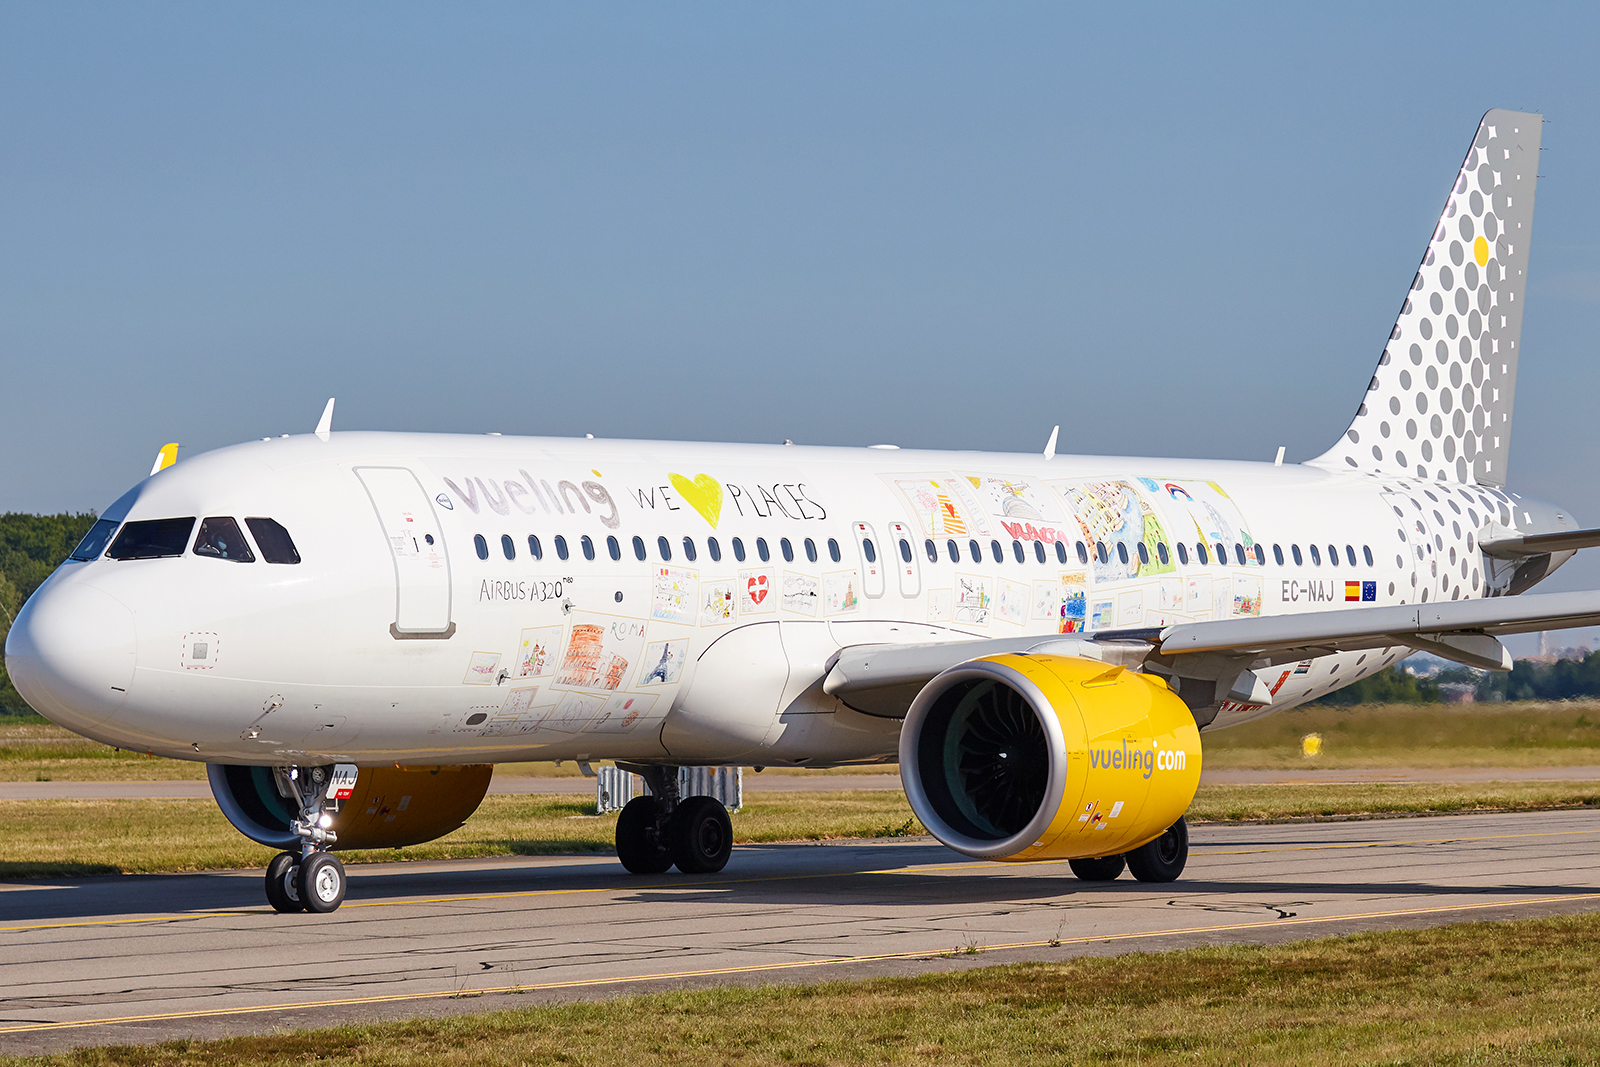 [25/04/2019] A320neo (EC-NAJ) Vueling "We love places" livery 1905240958215493216250016